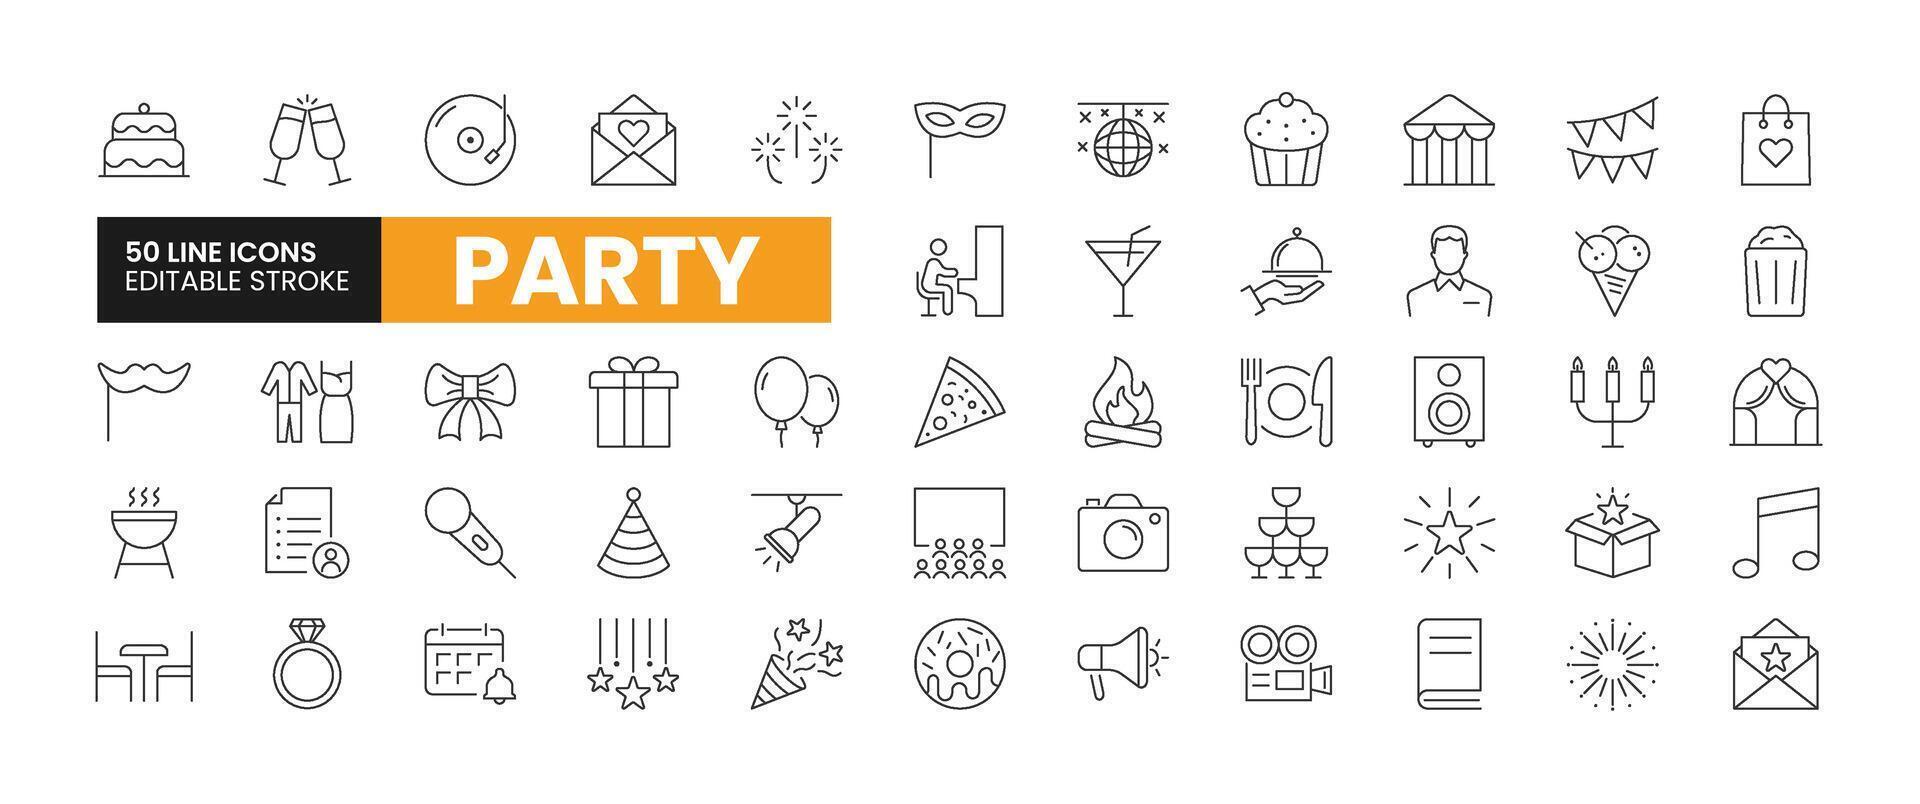 Set of 50 Party and Celebration line icons set. Party outline icons with editable stroke collection. Includes Invitation, Videography, Cake, Gifts, Guest List, and More. vector